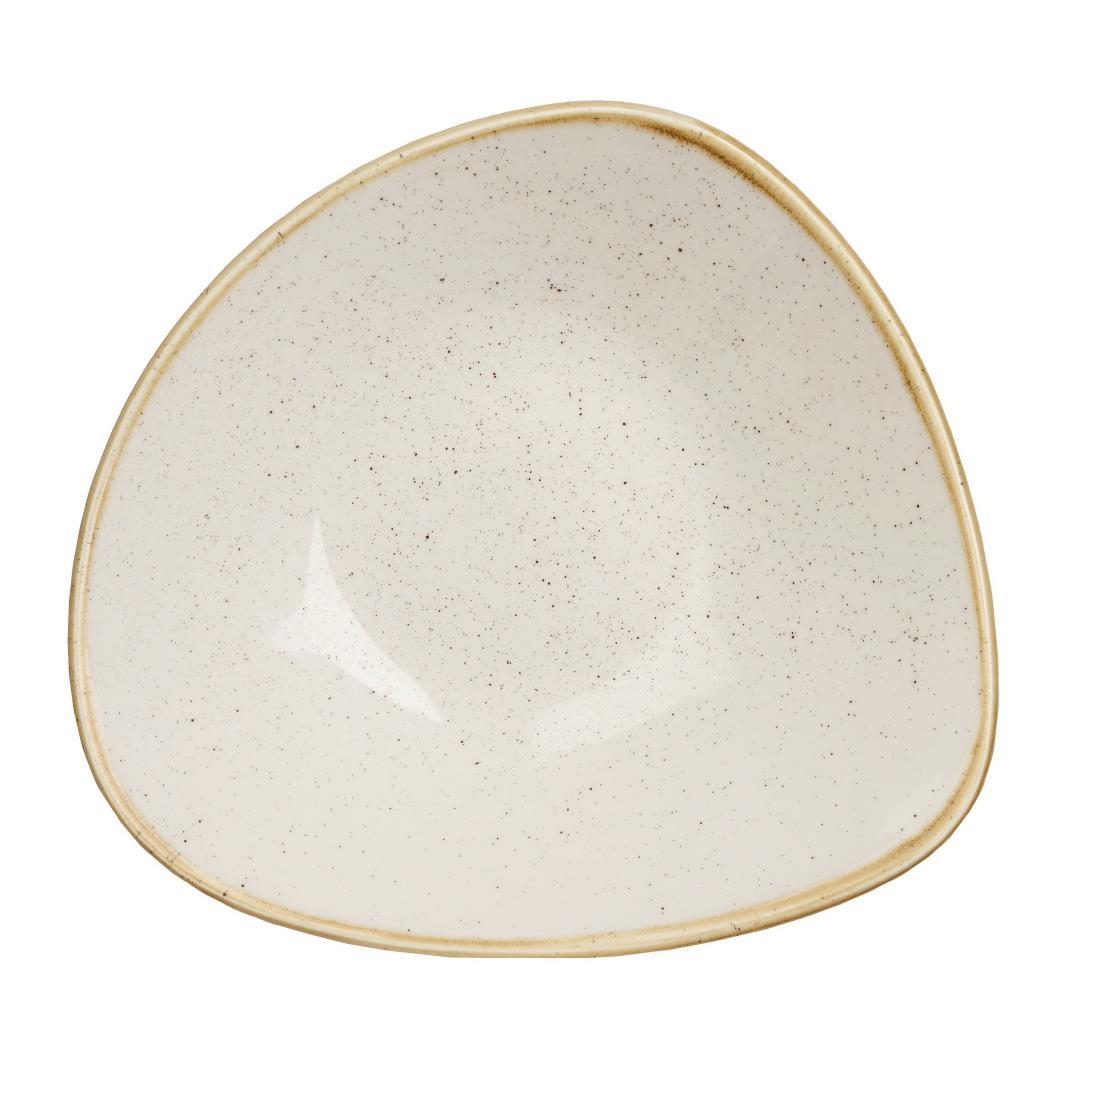 Churchill Stonecast Triangle Bowl Barley White 228mm (Pack of 12) - DK525  - 1